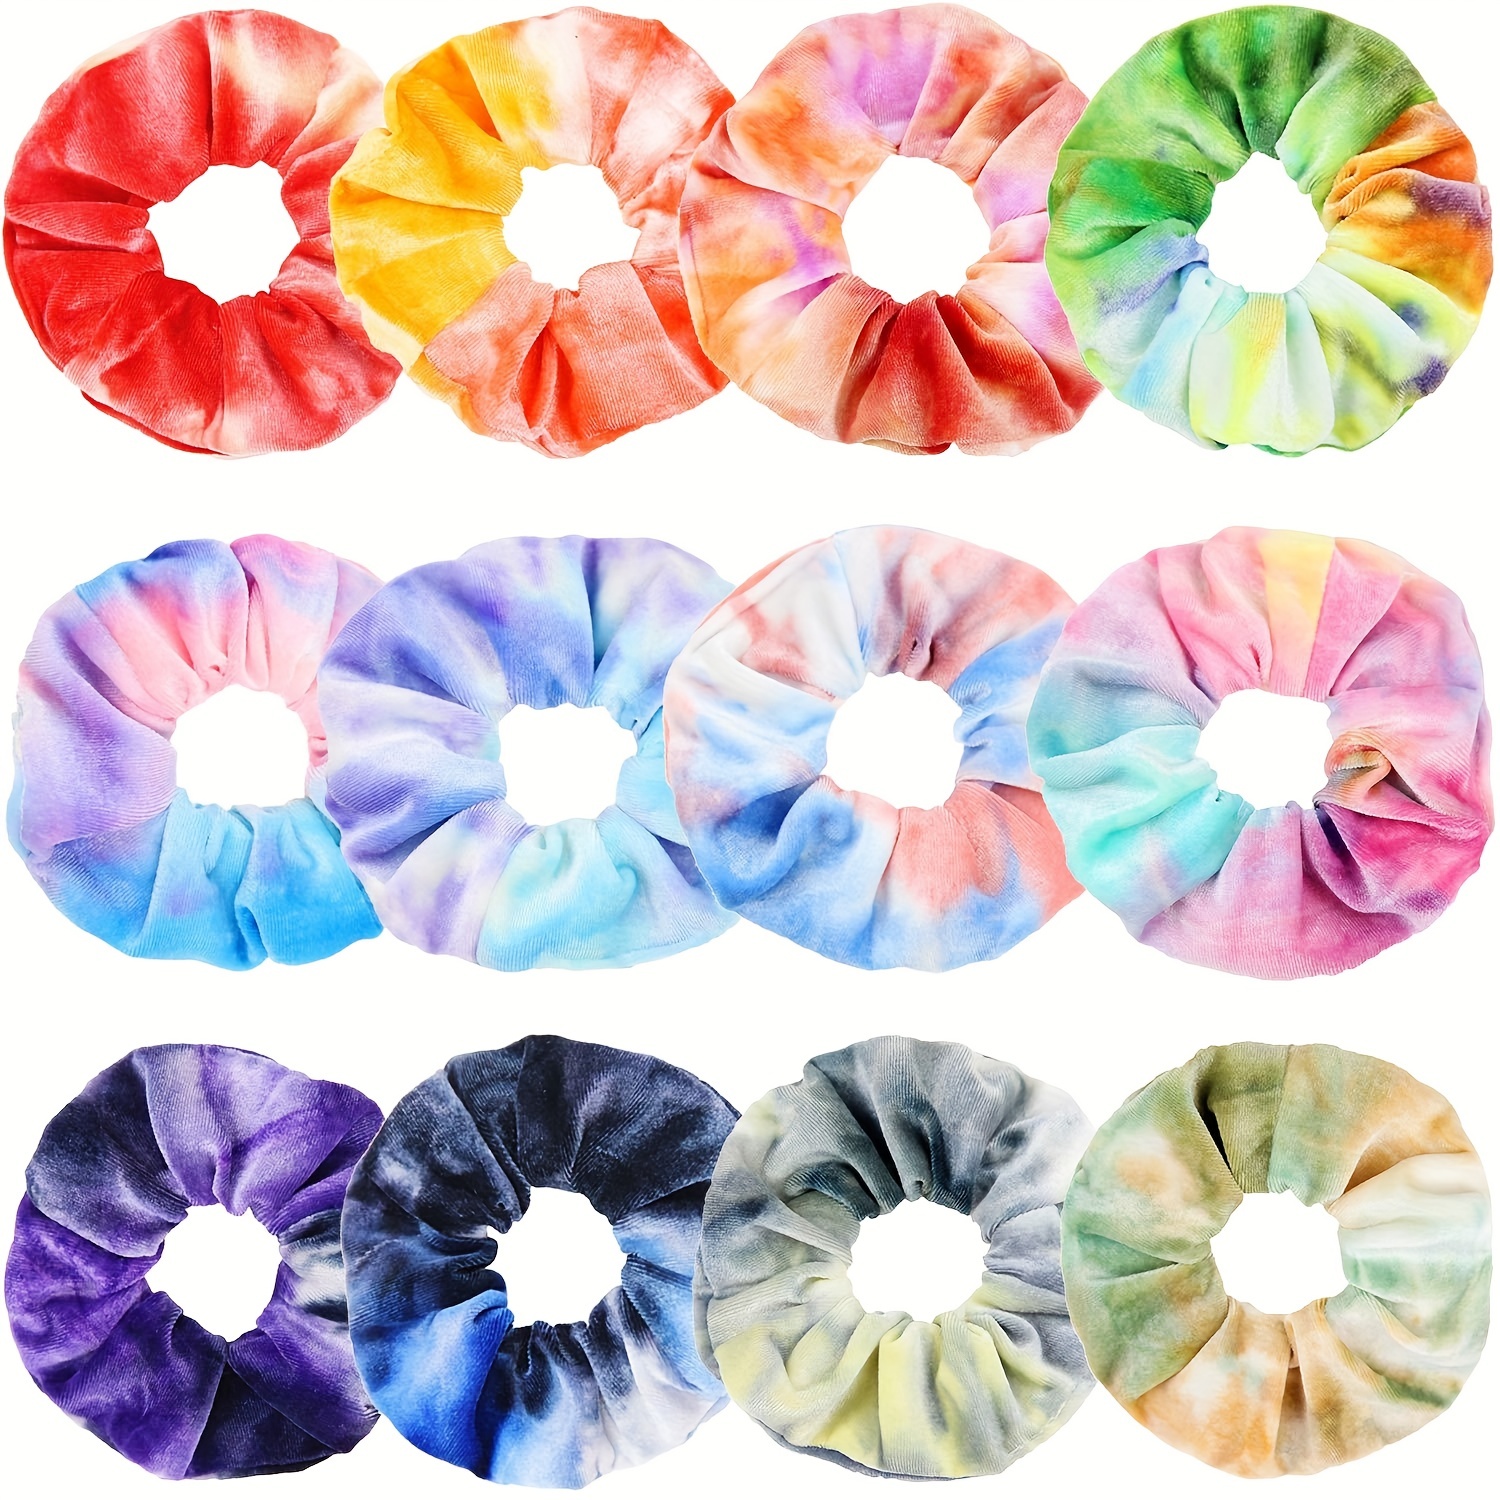 

12 Pcs Tie Dye Velvet Scrunchies For Girls - Soft Rainbow Ponytail Hair Ties For Teens And Women - Cute Elastic Hair Bands For Hair Styling And Accessorizing